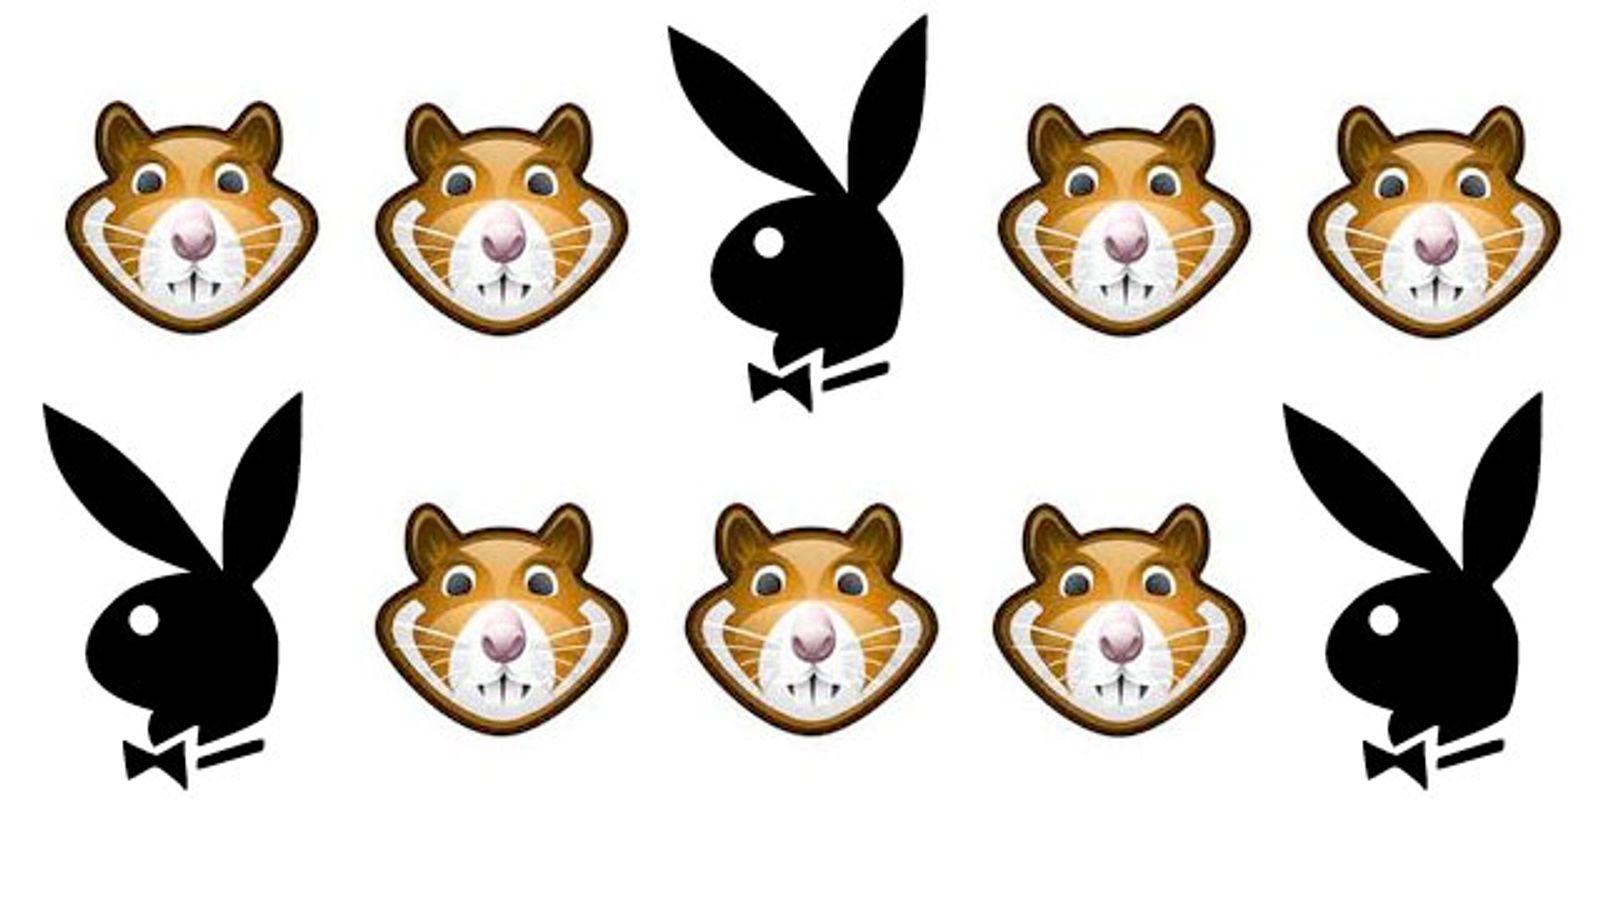 xHamster Buys Playboy, Announces Launch of PlayHamster